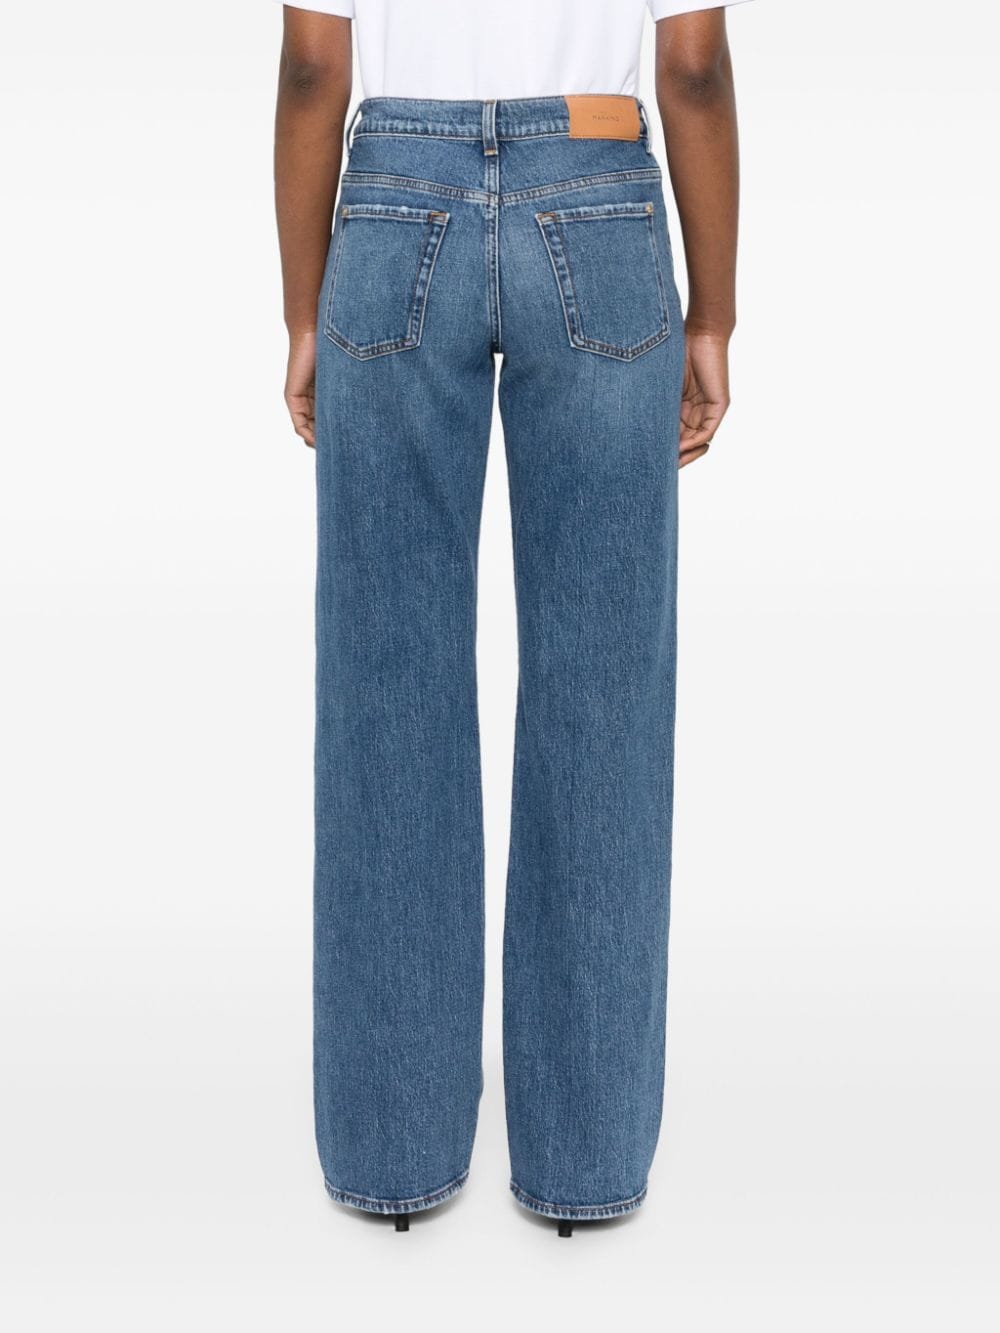 7 For All Mankind 7 FOR ALL MANKIND- Tess Wide Leg Jeans